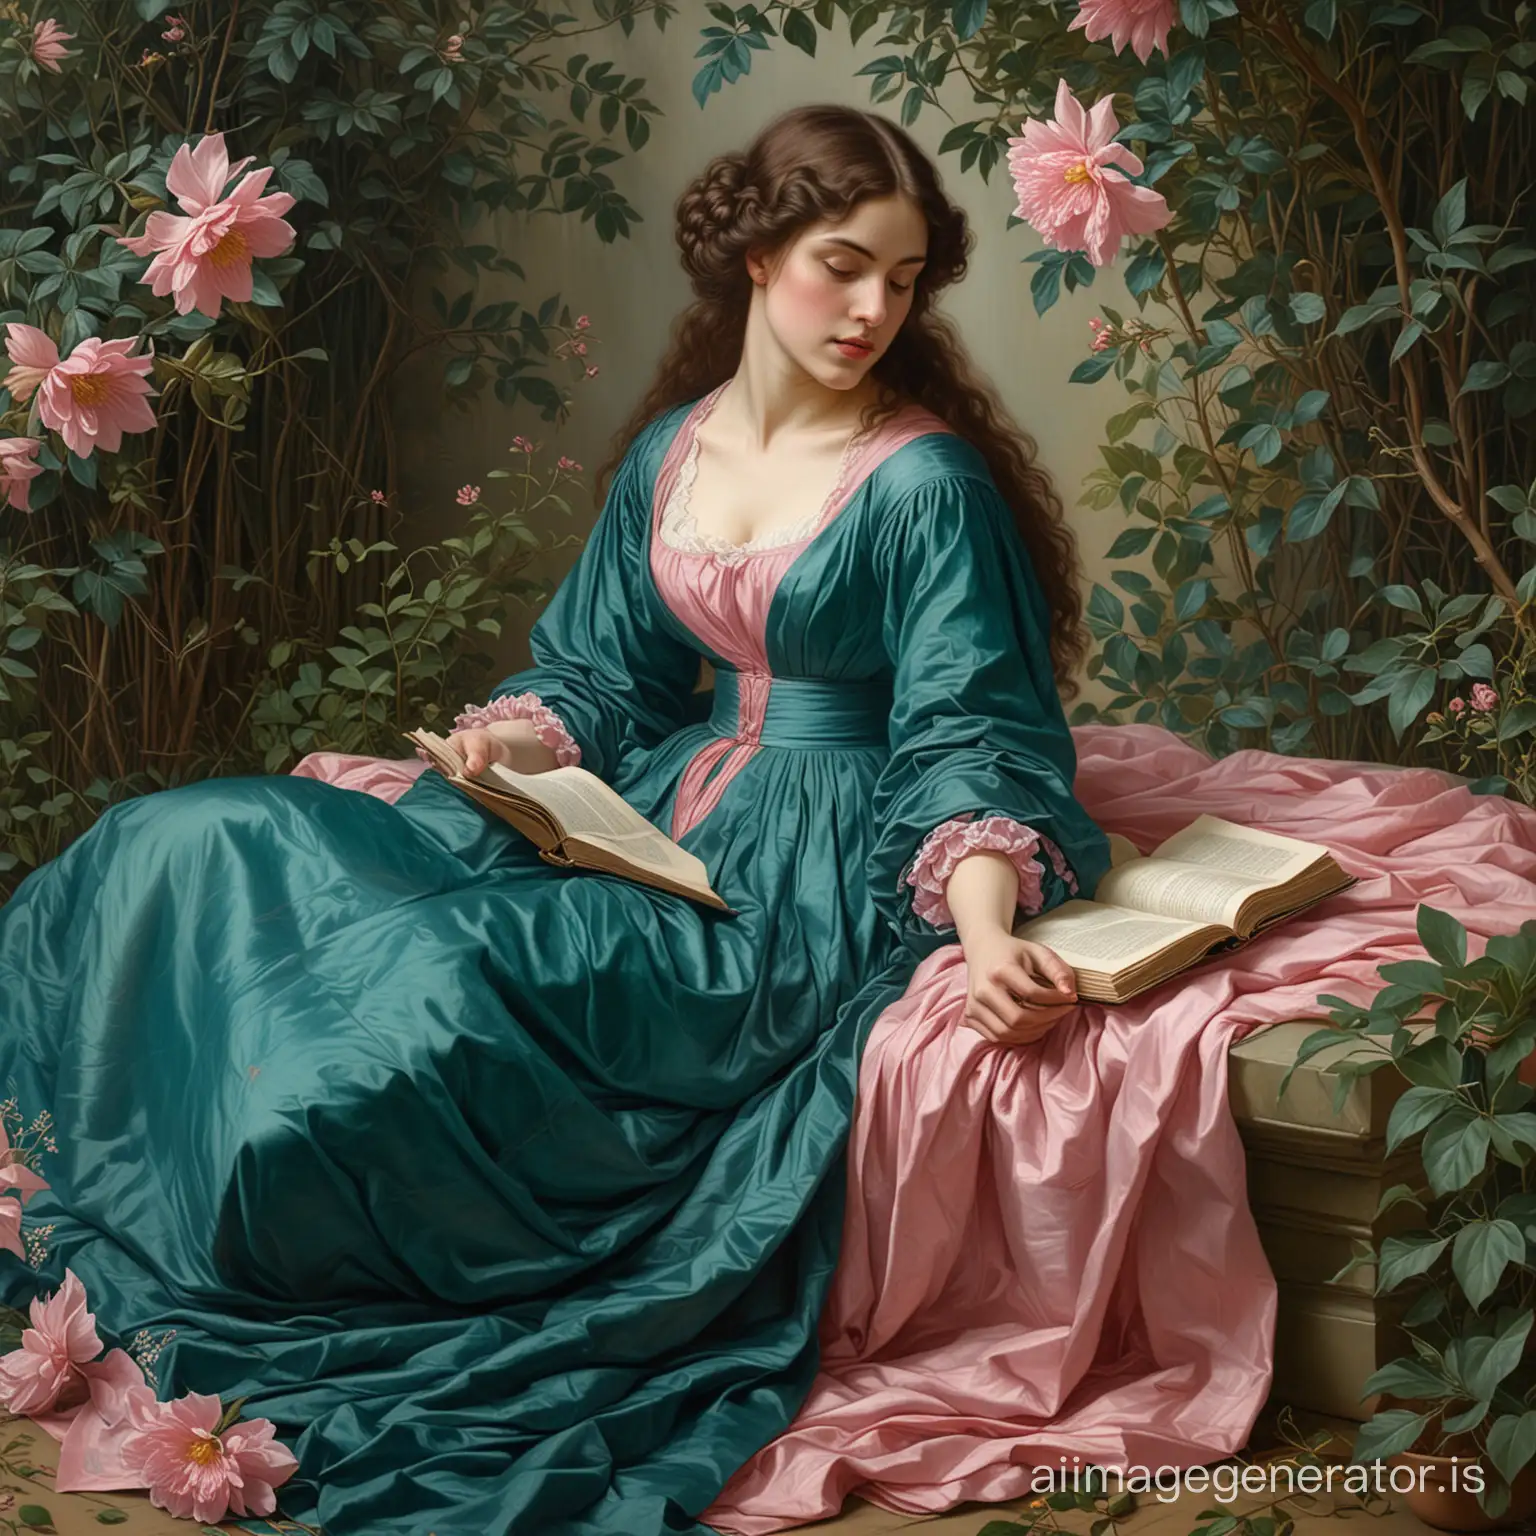 PreRaphaelite-Painting-DarkHaired-Woman-Amidst-Hederas-with-Open-Book-and-Pink-Flower